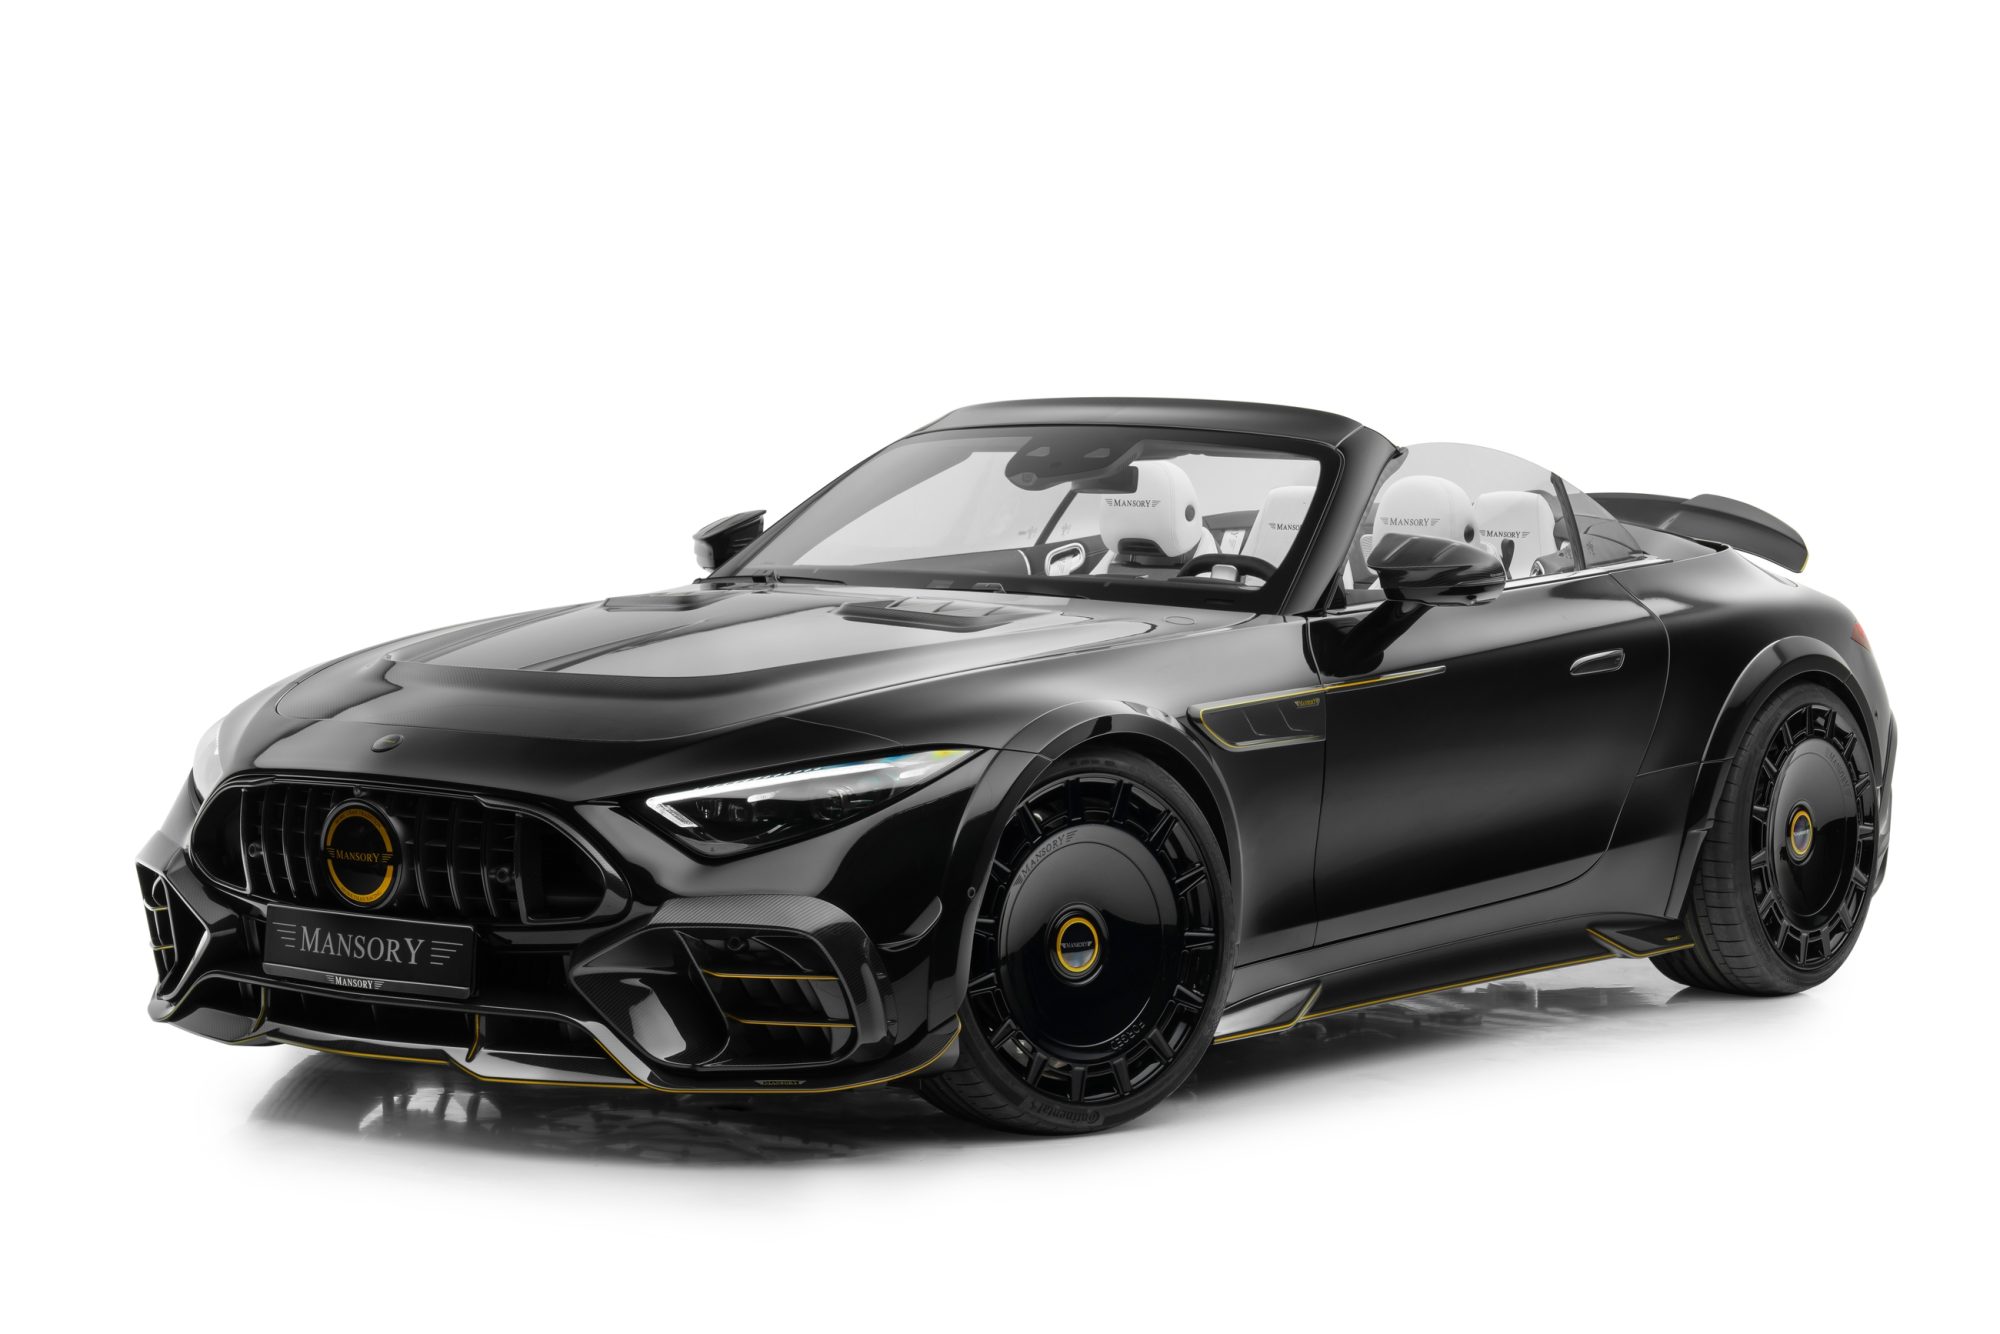 Mansory introduces new tuning package for the Mercedes-AMG SL